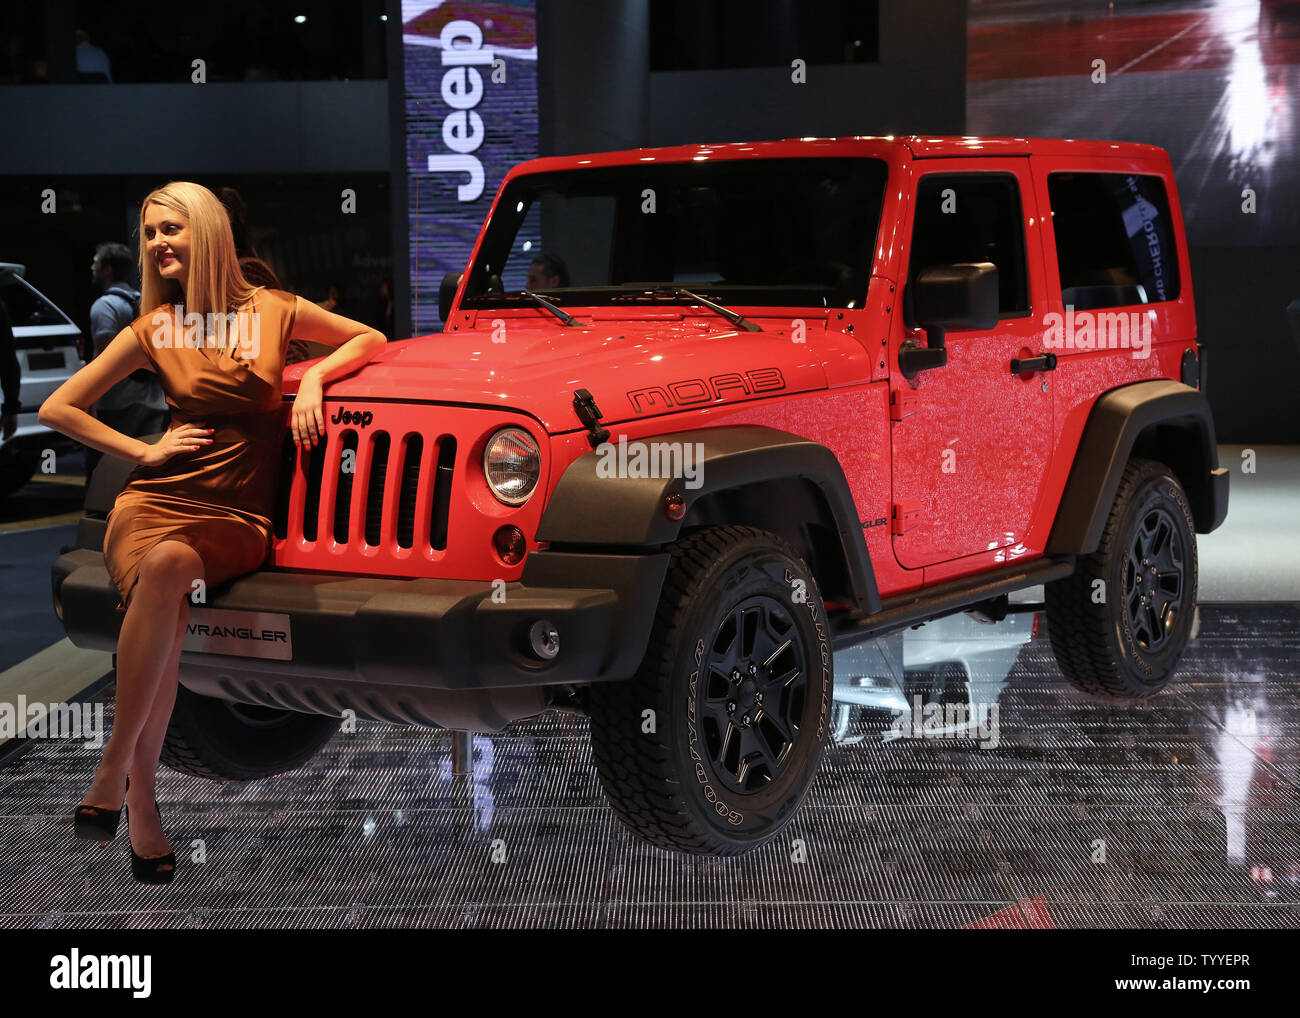 A model sits on a 2013 Jeep Wrangler Moab Edition on display during press  day at the biennial Paris Motor Show in Paris on September 27, 2012. The  show, the first motor